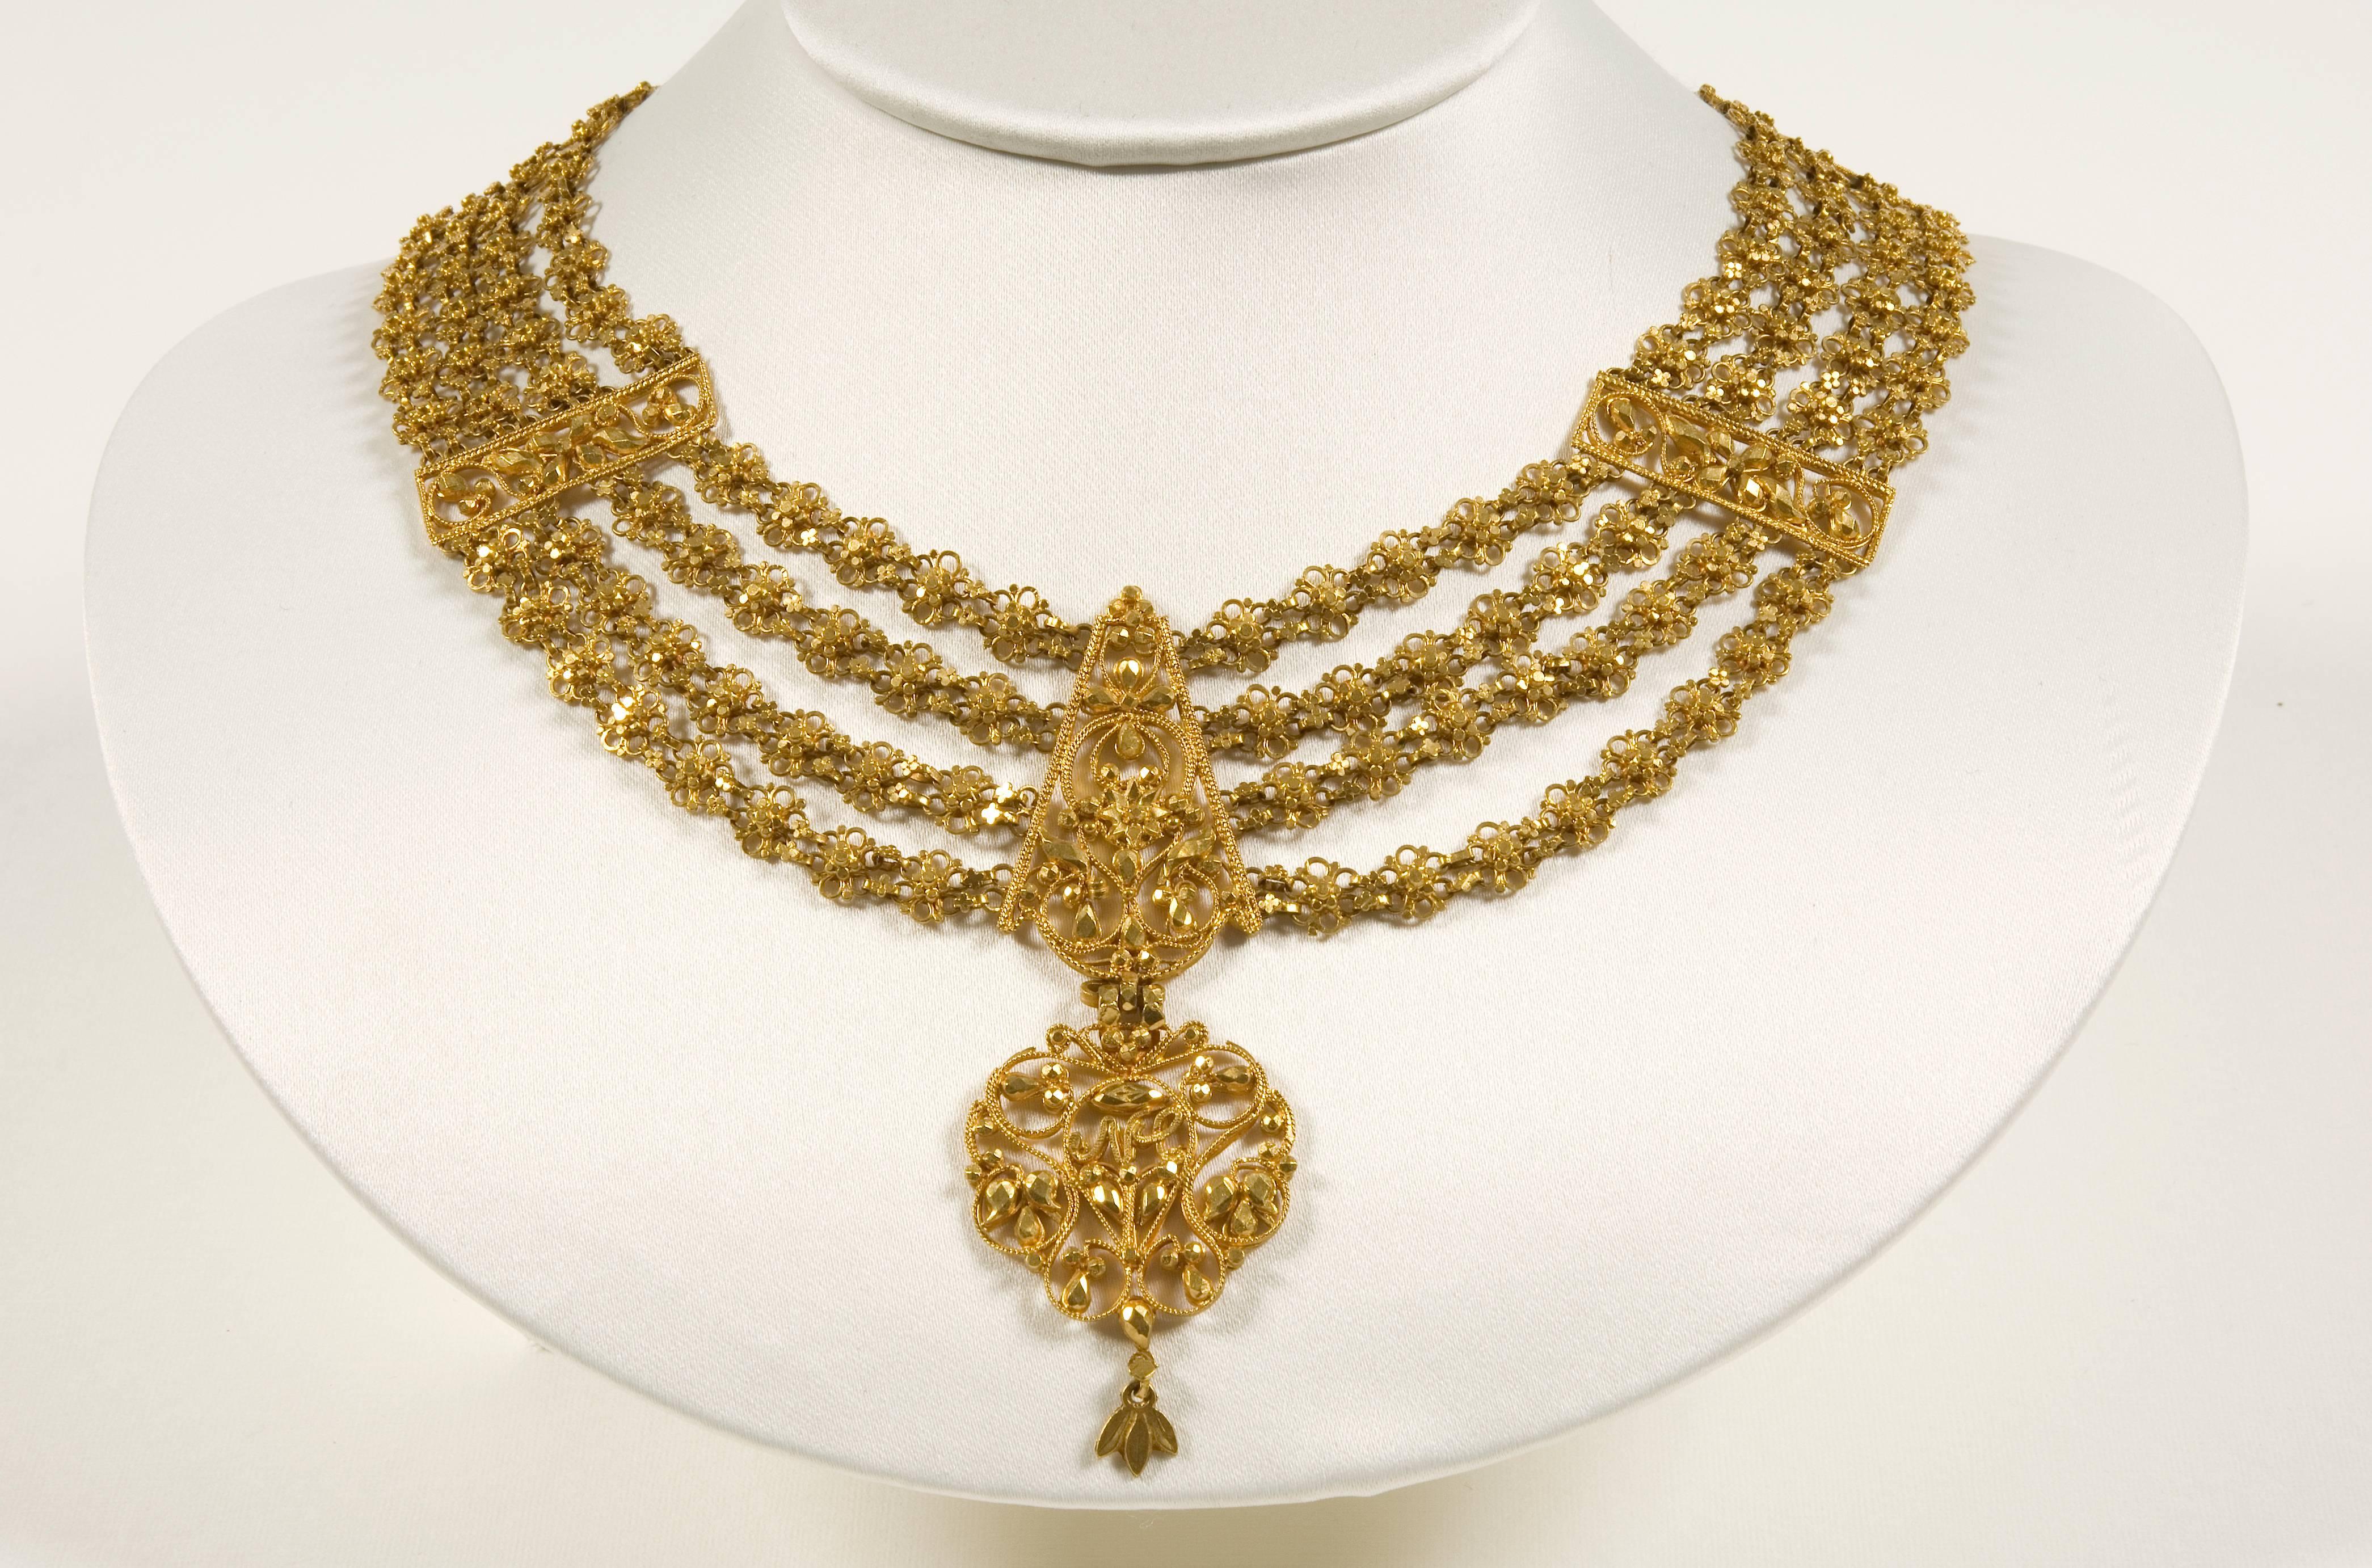 A 22ct gold necklace of pierced, chased and cut gold linked florets with applied granulation and minute flat discs, and with a suspended floral pendant.

India, West Bengal, Calcutta, 19th century
